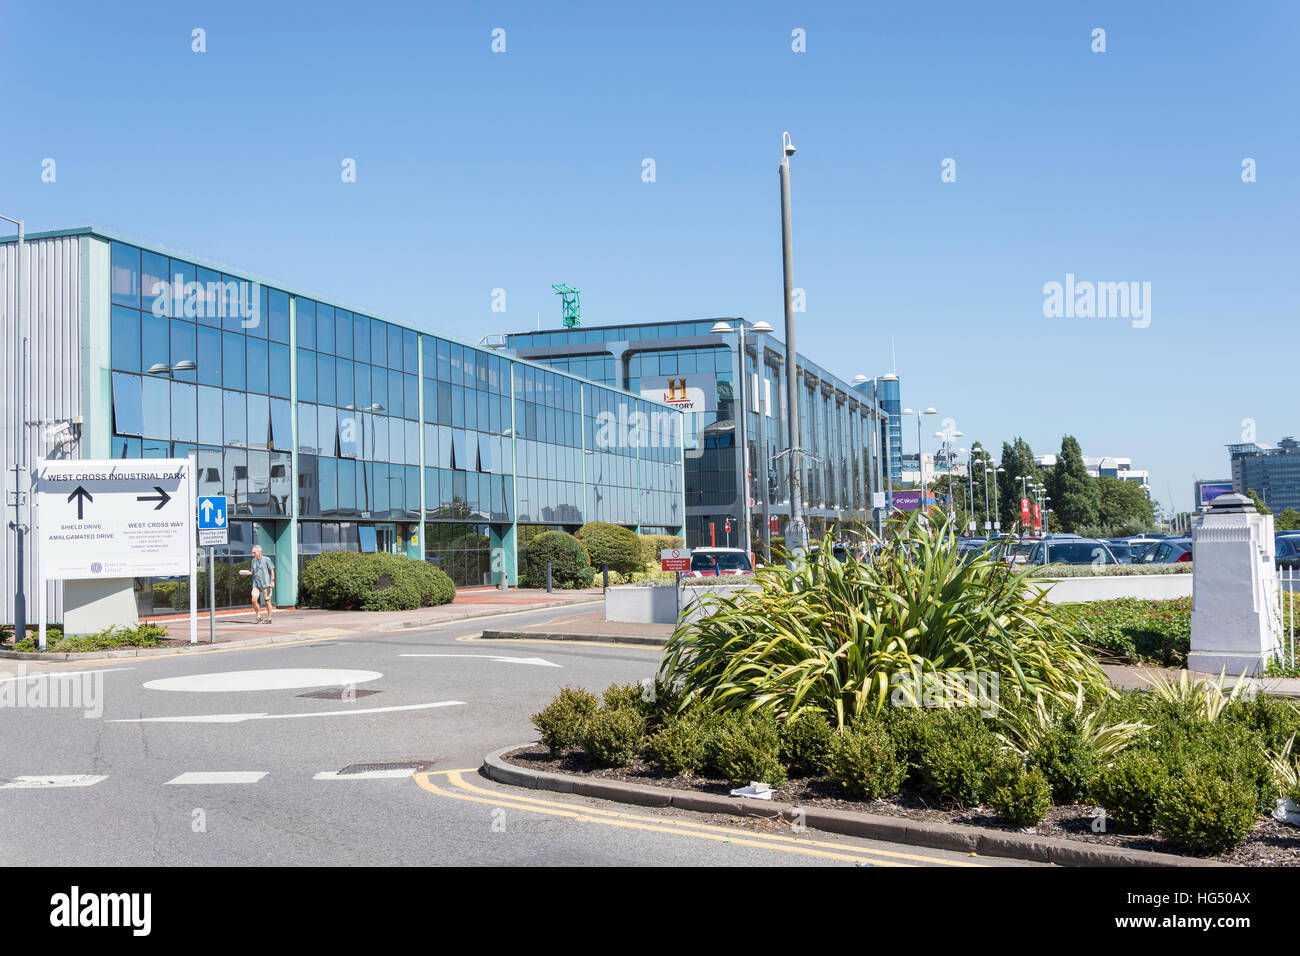 West Cross Industrial Park, Great West Road, Brentford, London Borough of Hounslow, Greater London, England, United Kingdom Stock Photo